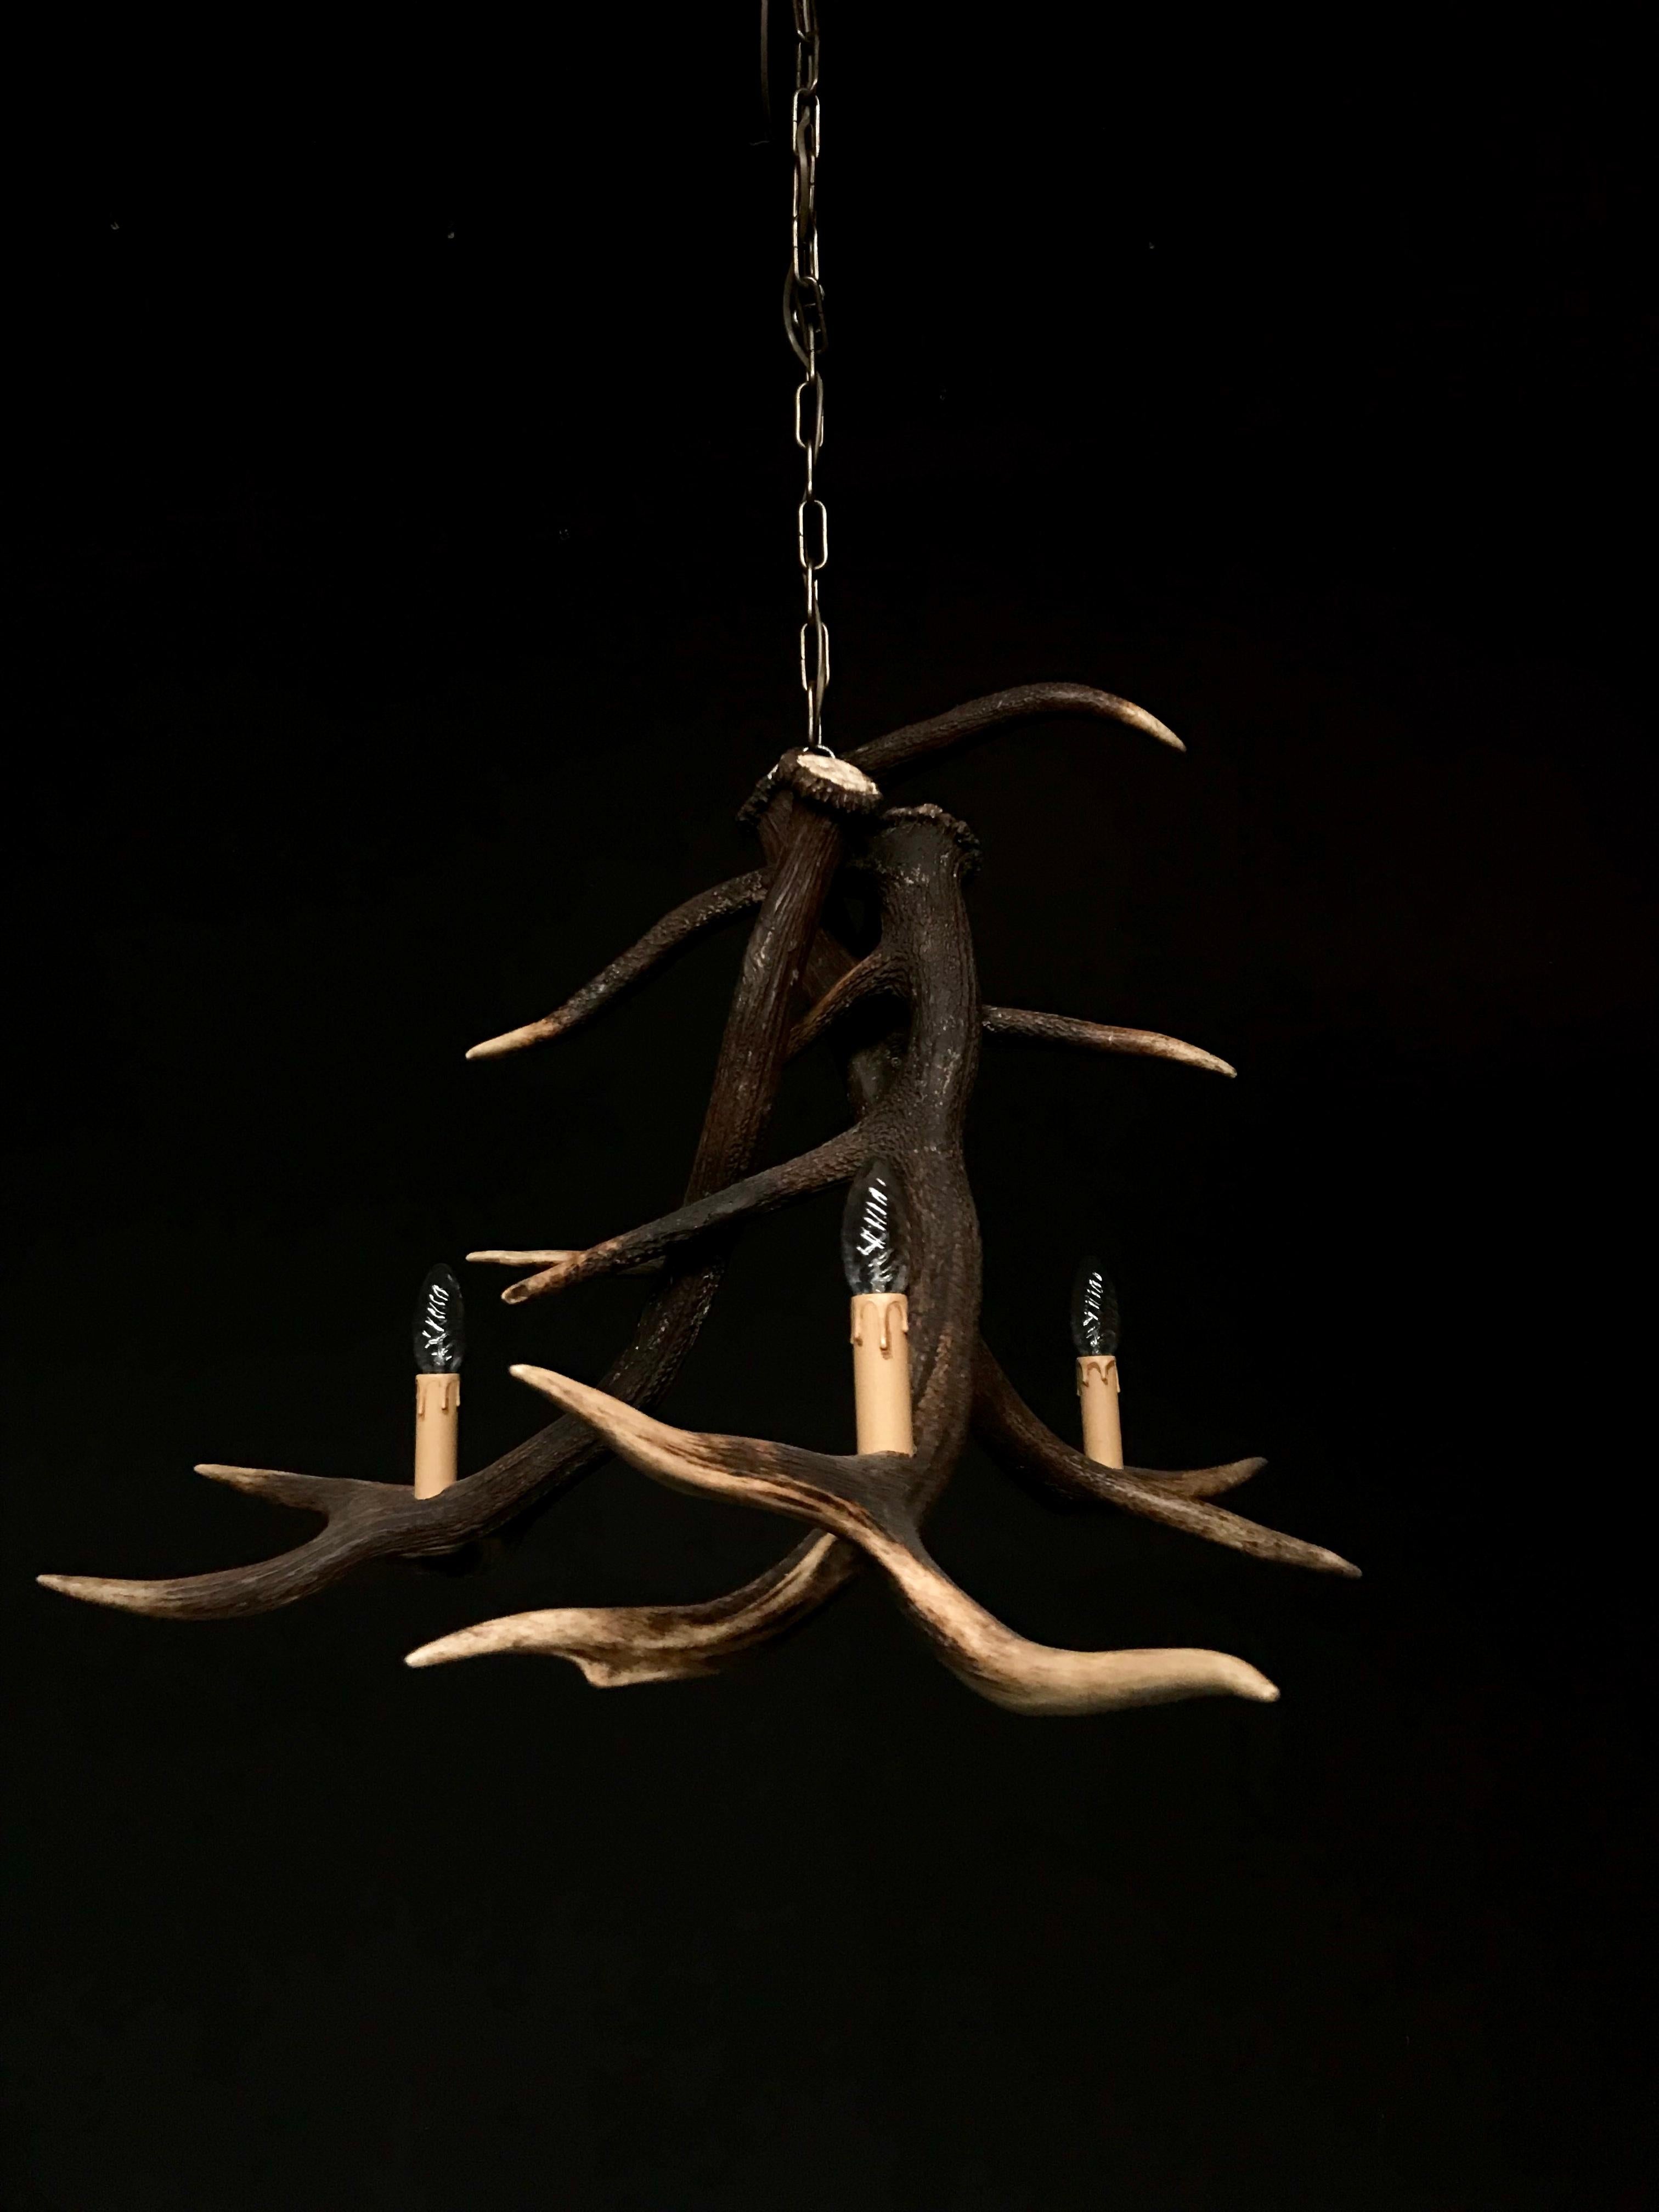 Modern chandelier made of antlers (HG 261). The chandelier is made of red deer antler. The electrical wiring is concealed in the antlers. We can make any antler chandelier entirely according to your wishes.